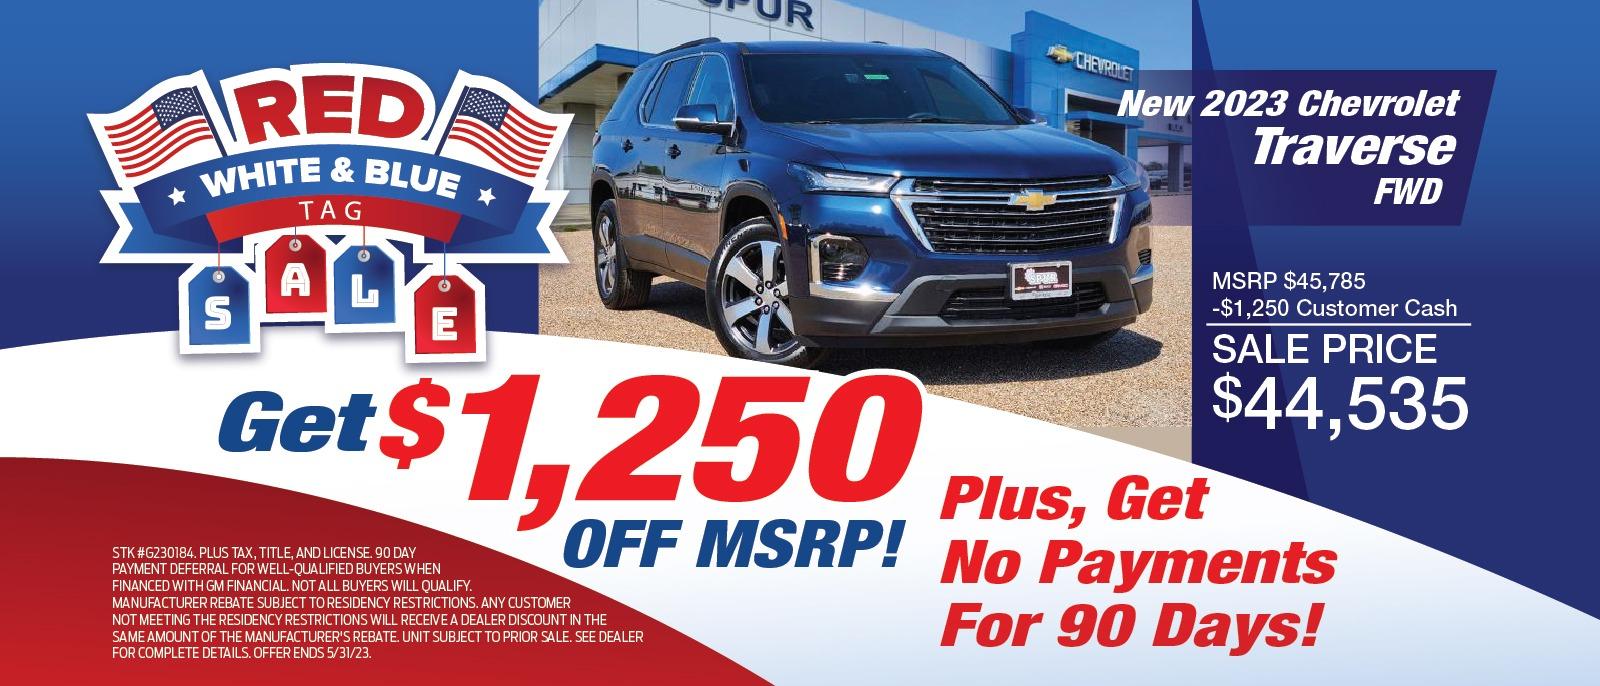 NEW 2023 TRAVERSE FWD
GET $1,250 OFF MSRP!